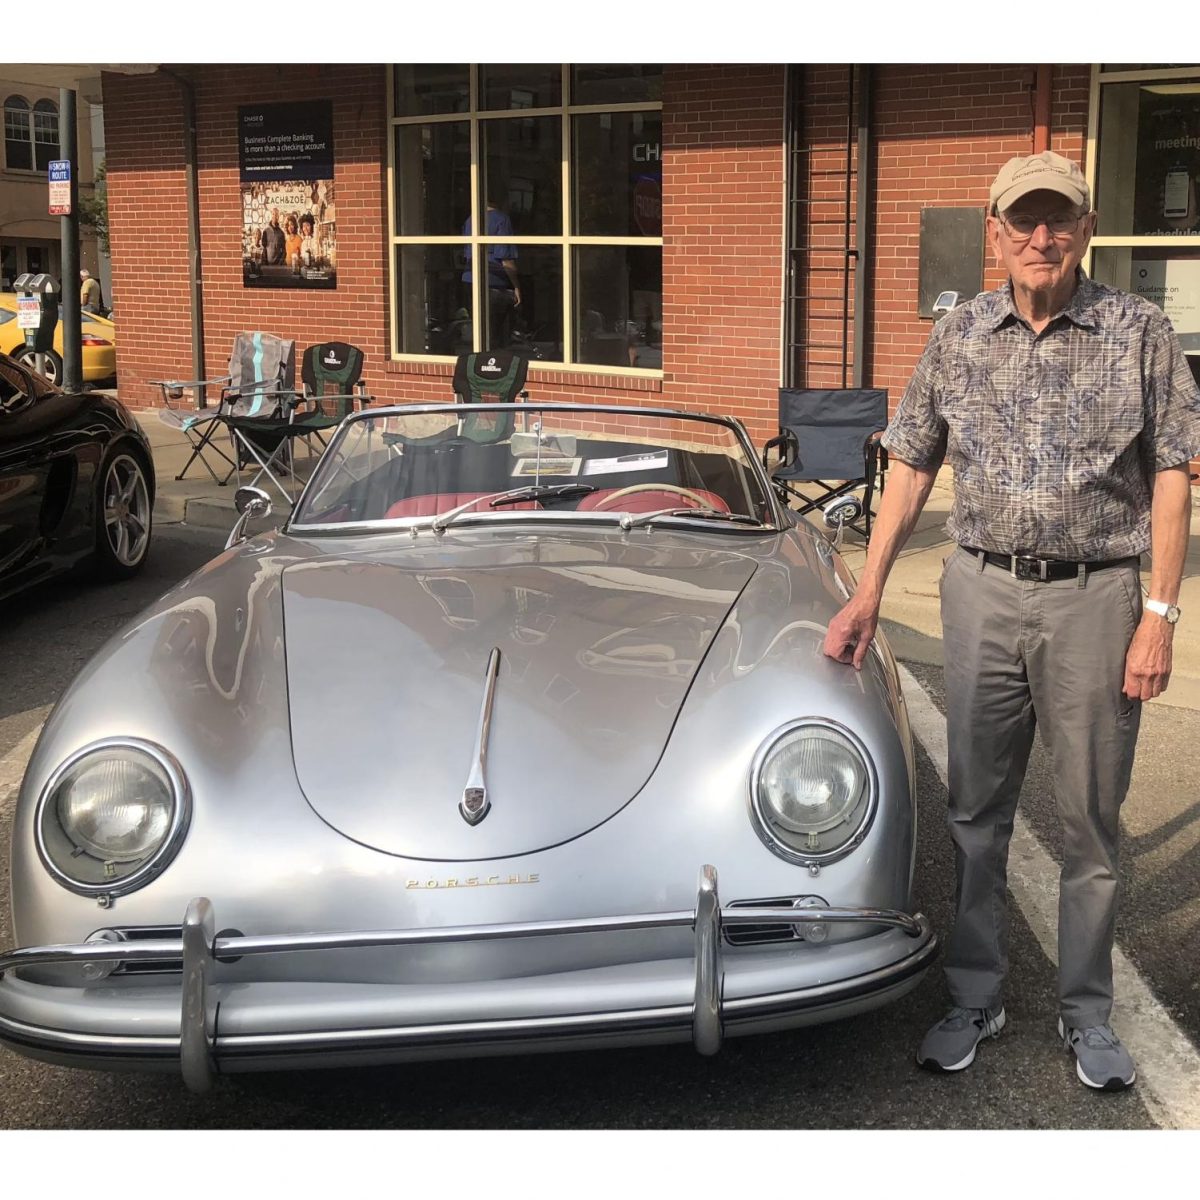 Dick+Snyder+with+his+silver+1959+Porsche.